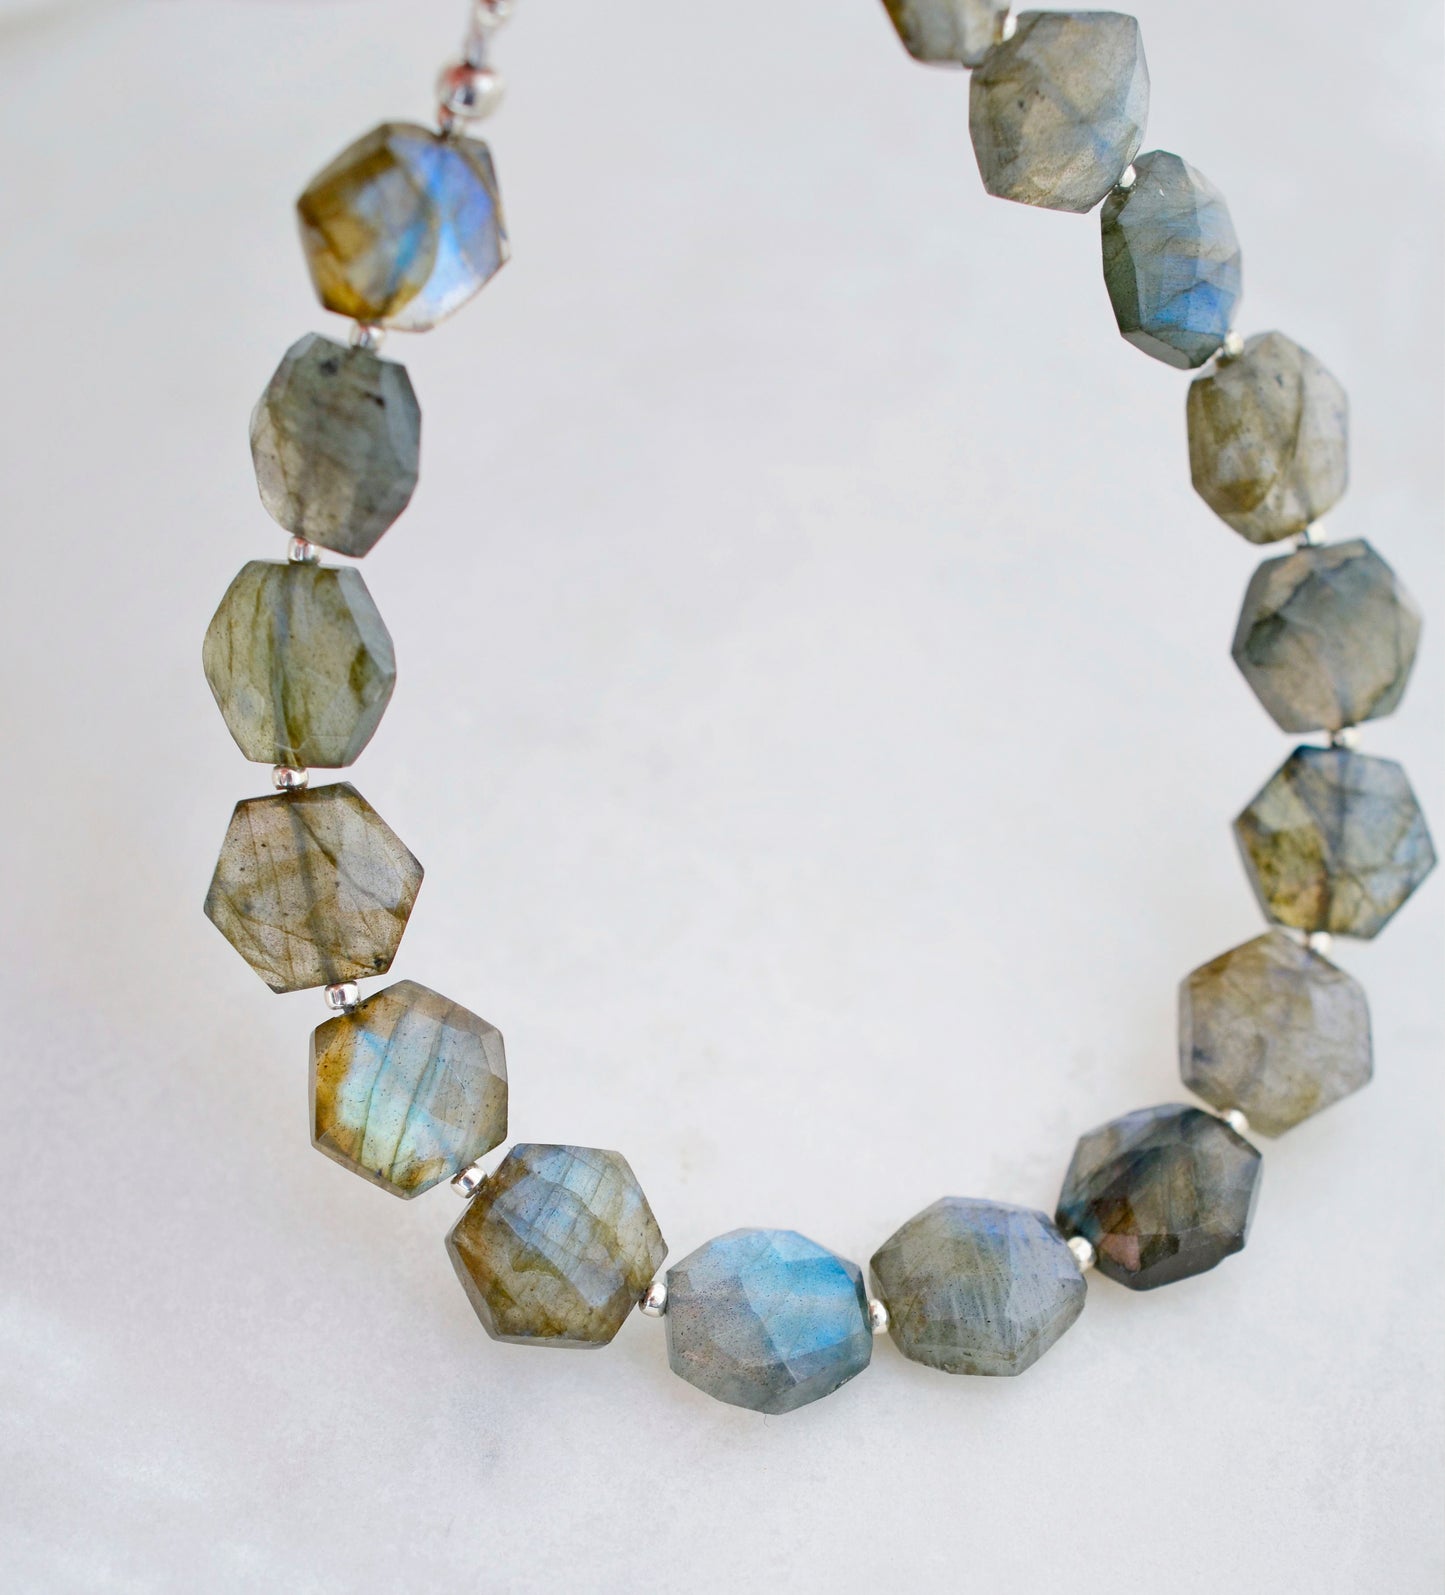 Close up of beaded Labradorite gemstone bracelet shown in sterling silver. The stones are faceted and cut in a hexagonal shape.